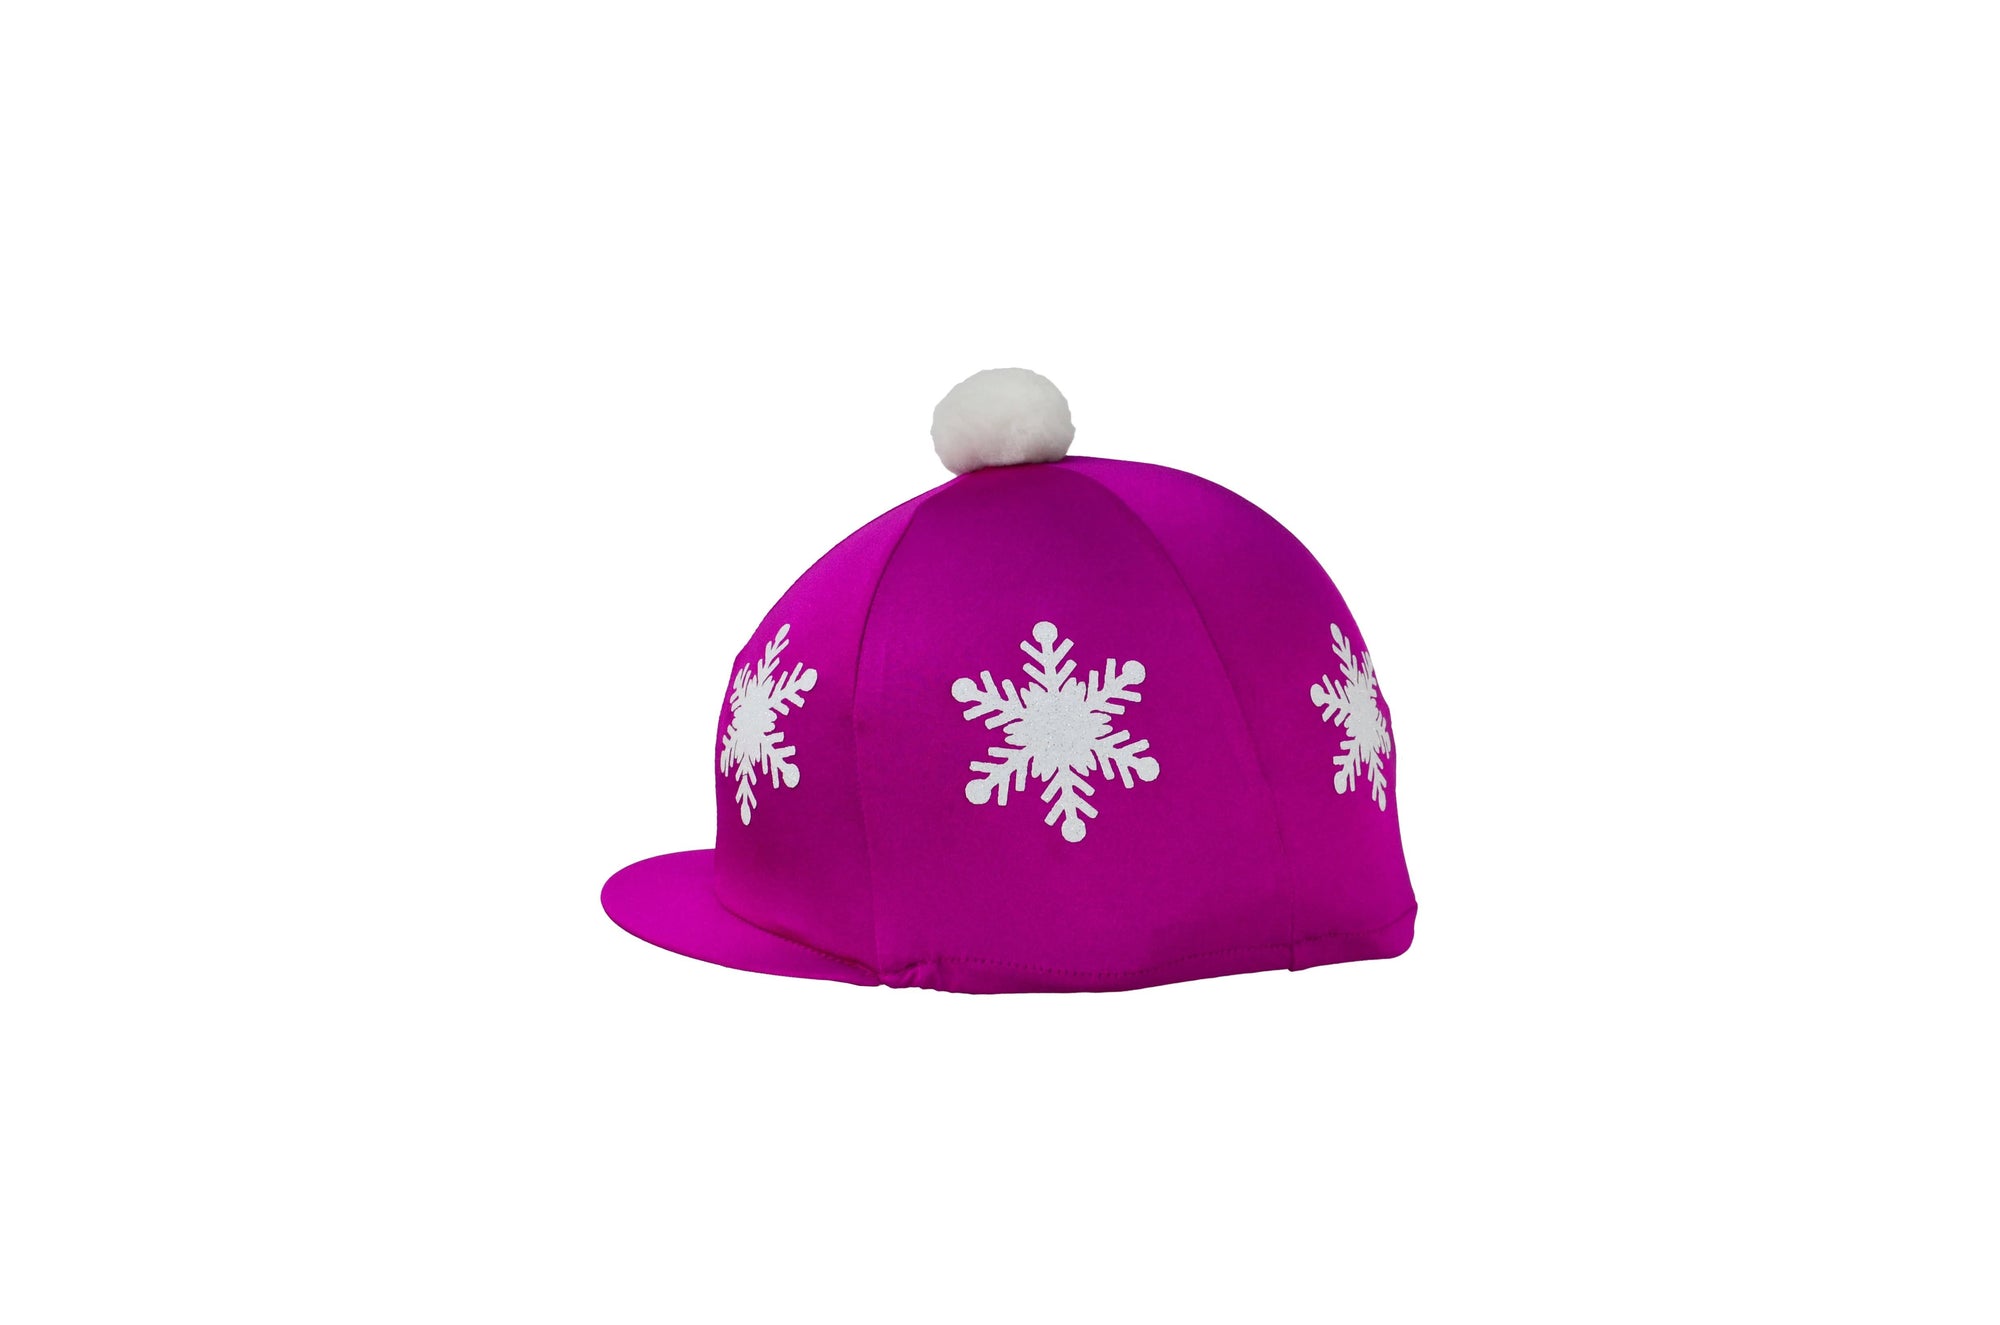 Hy equestrian snowflake with pom pom hat cover